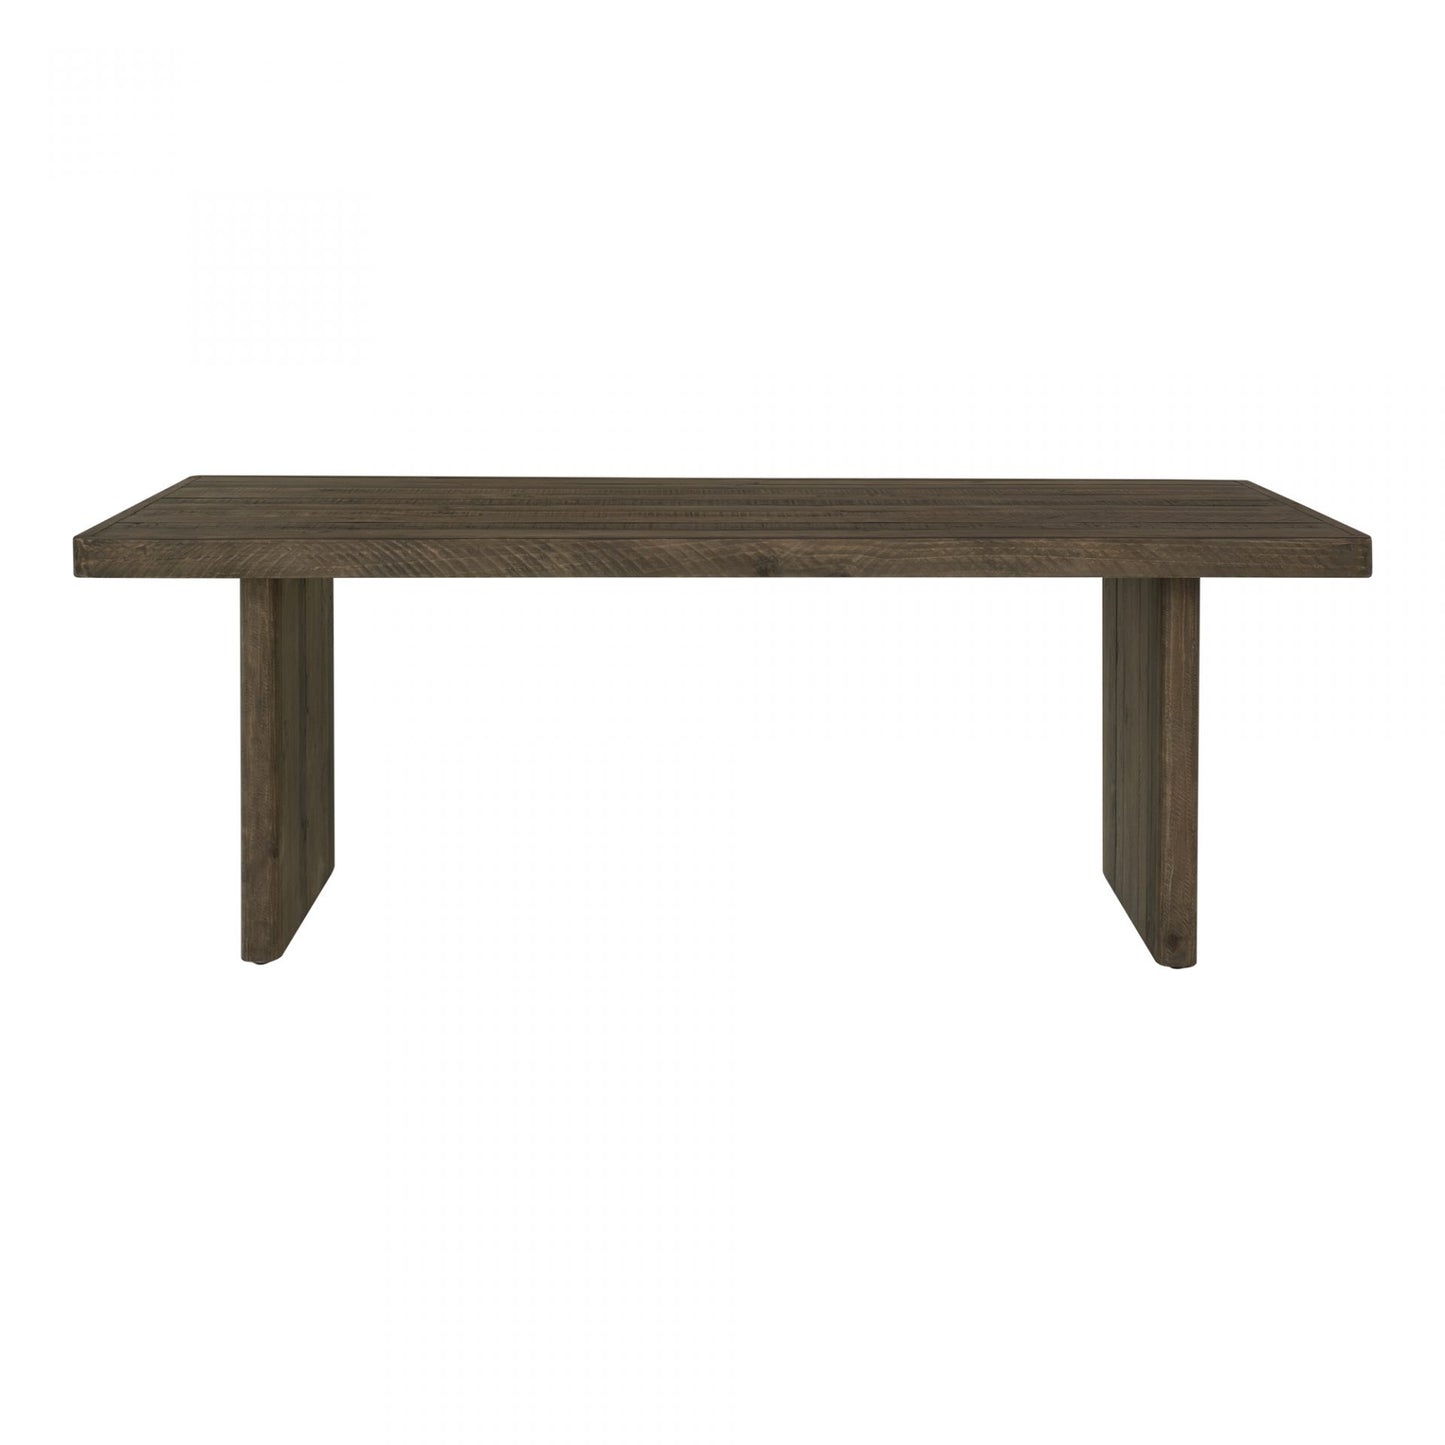 Monterey Dining Table FR-1024-29